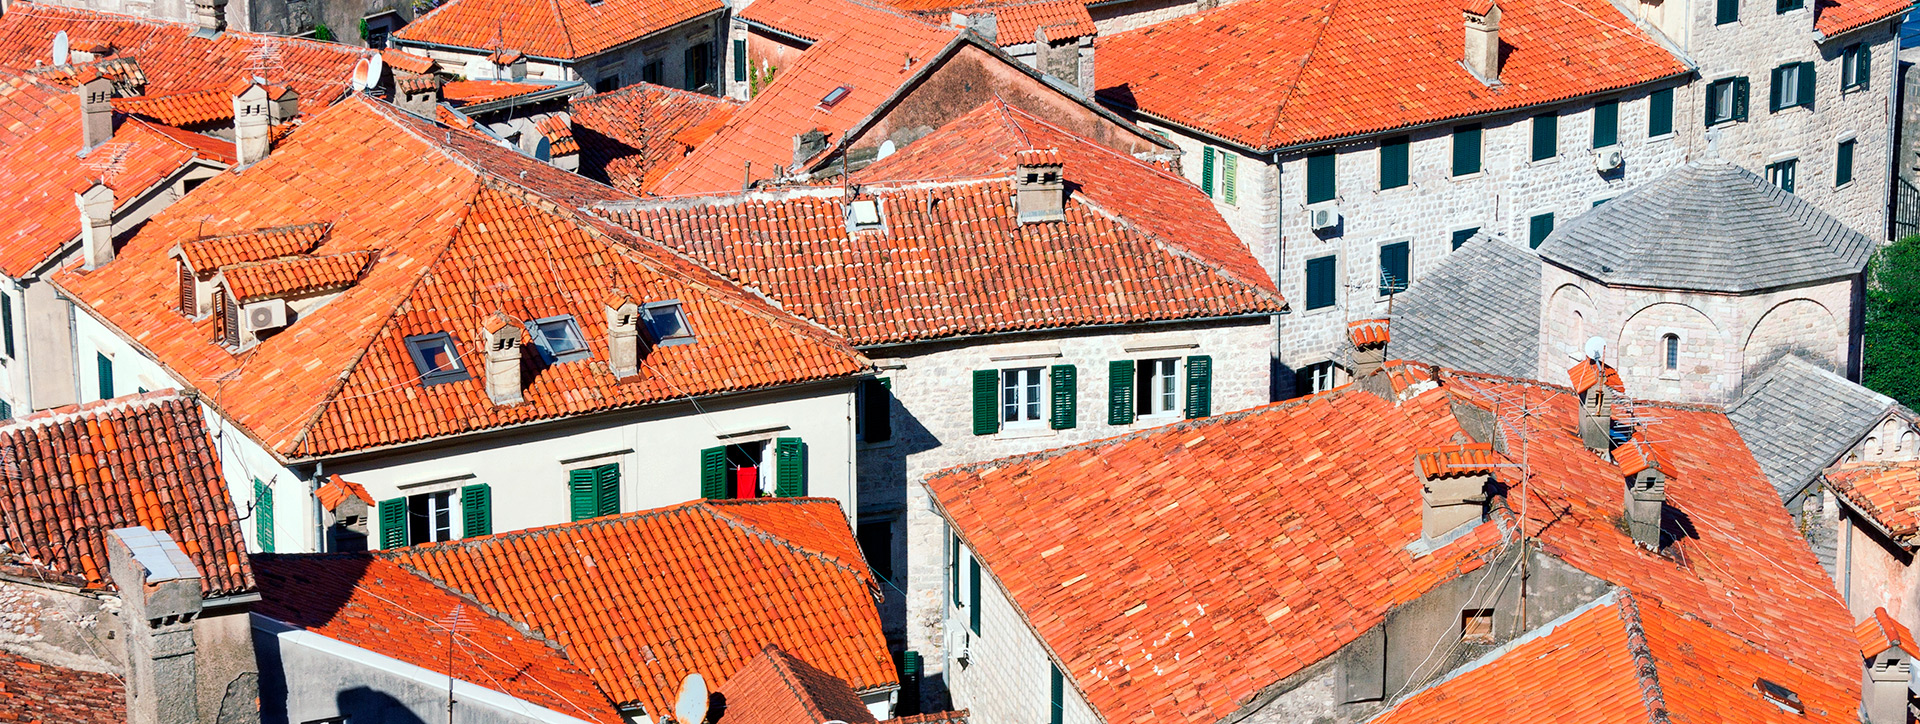 The rooftops of the city, Perast, Montenegro - SimpleSail sailing routes